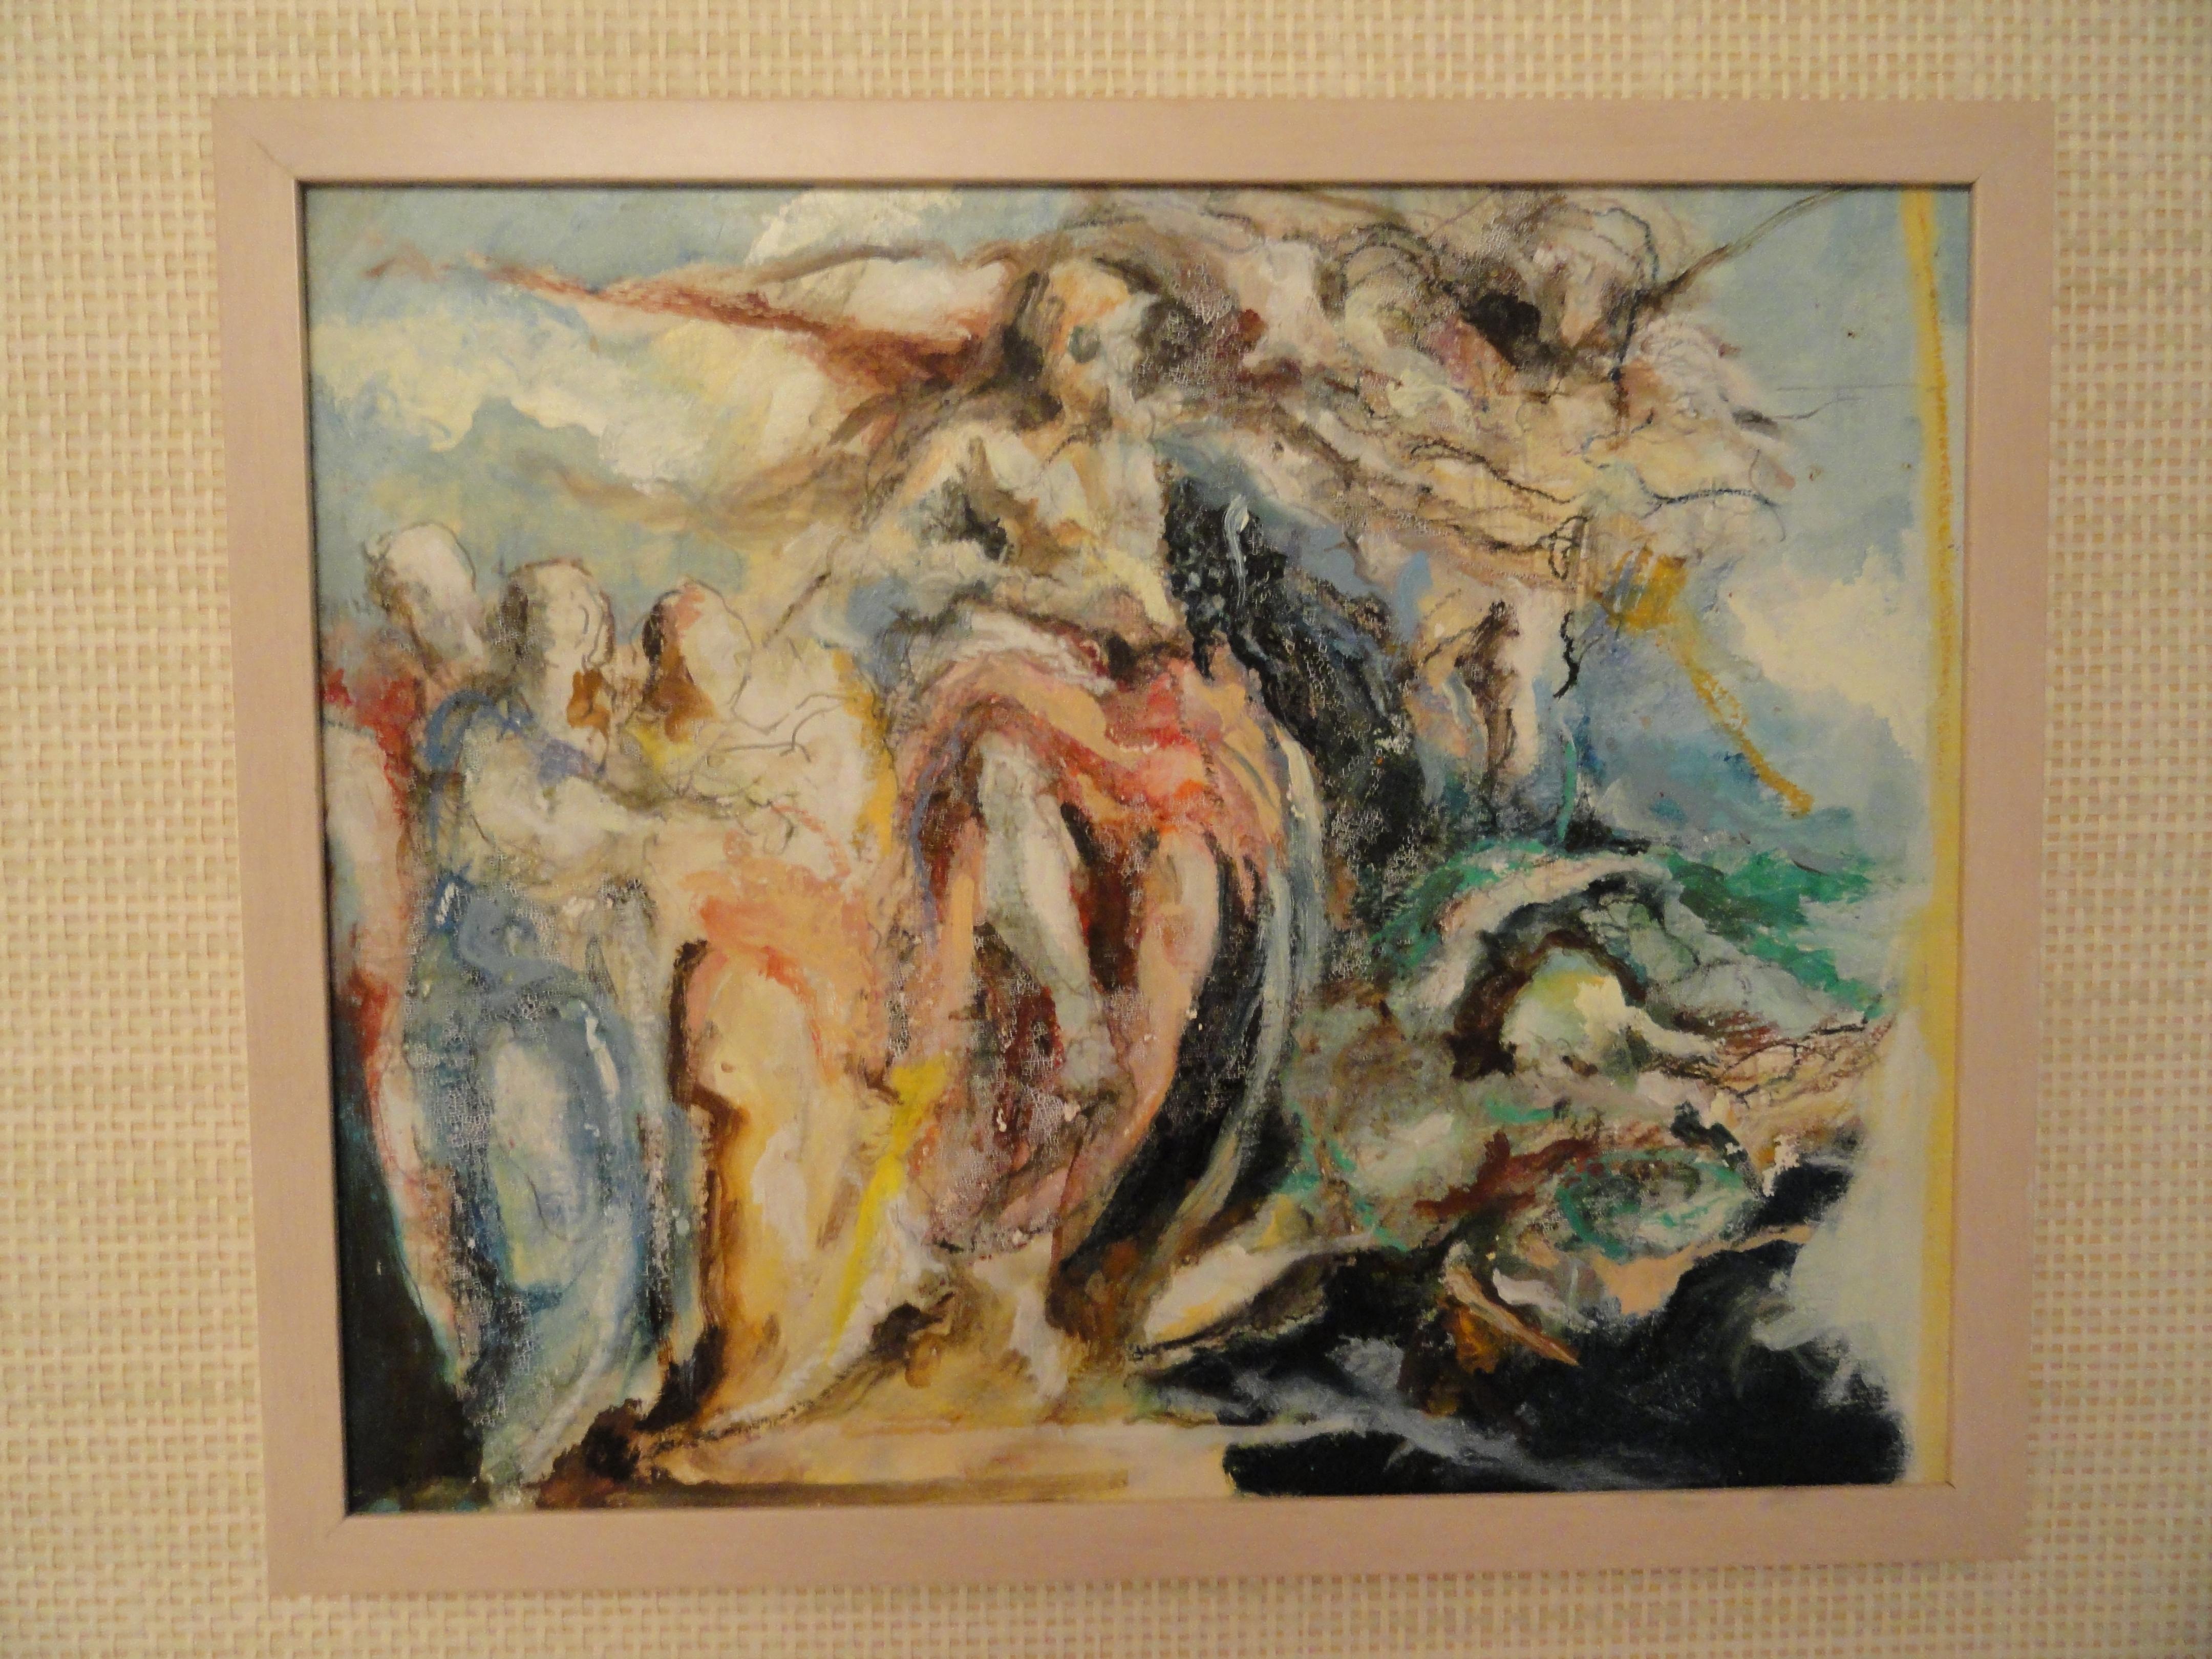 Unsigned oil on canvas with small wood frame and mounted on a large-scale frame with woven matting.
Image is 17.25